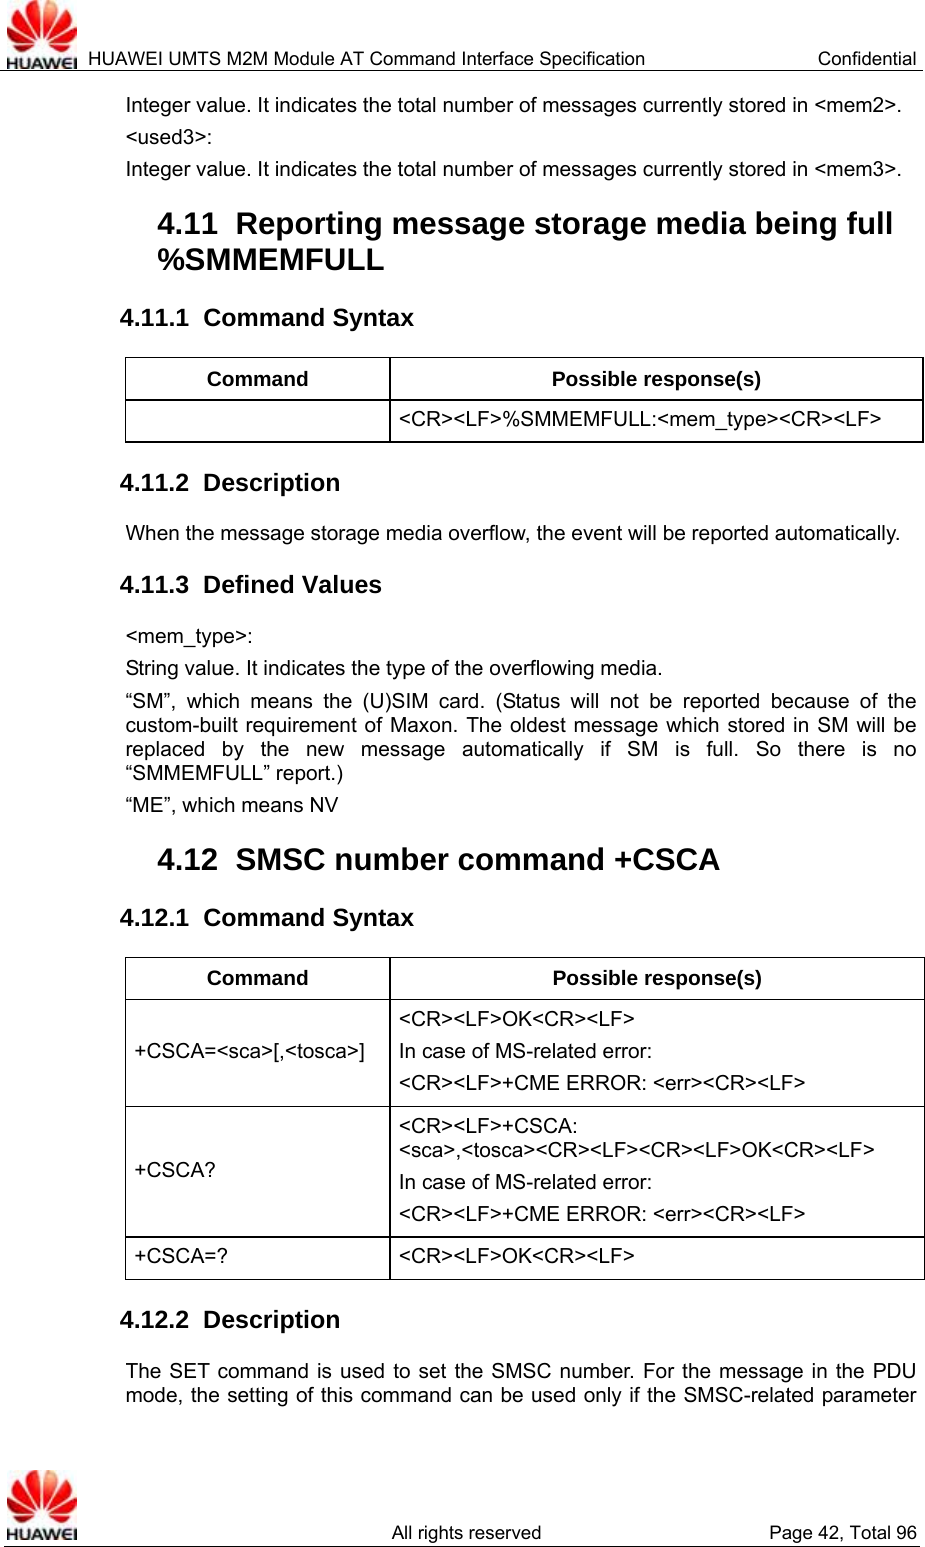  HUAWEI UMTS M2M Module AT Command Interface Specification  Confidential   All rights reserved  Page 42, Total 96 Integer value. It indicates the total number of messages currently stored in &lt;mem2&gt;.   &lt;used3&gt;:  Integer value. It indicates the total number of messages currently stored in &lt;mem3&gt;.   4.11  Reporting message storage media being full %SMMEMFULL  4.11.1  Command Syntax Command Possible response(s)  &lt;CR&gt;&lt;LF&gt;%SMMEMFULL:&lt;mem_type&gt;&lt;CR&gt;&lt;LF&gt; 4.11.2  Description When the message storage media overflow, the event will be reported automatically.   4.11.3  Defined Values &lt;mem_type&gt;:  String value. It indicates the type of the overflowing media.   “SM”, which means the (U)SIM card. (Status will not be reported because of the custom-built requirement of Maxon. The oldest message which stored in SM will be replaced by the new message automatically if SM is full. So there is no “SMMEMFULL” report.) “ME”, which means NV 4.12  SMSC number command +CSCA 4.12.1  Command Syntax Command Possible response(s) +CSCA=&lt;sca&gt;[,&lt;tosca&gt;] &lt;CR&gt;&lt;LF&gt;OK&lt;CR&gt;&lt;LF&gt; In case of MS-related error:   &lt;CR&gt;&lt;LF&gt;+CME ERROR: &lt;err&gt;&lt;CR&gt;&lt;LF&gt; +CSCA? &lt;CR&gt;&lt;LF&gt;+CSCA: &lt;sca&gt;,&lt;tosca&gt;&lt;CR&gt;&lt;LF&gt;&lt;CR&gt;&lt;LF&gt;OK&lt;CR&gt;&lt;LF&gt; In case of MS-related error:   &lt;CR&gt;&lt;LF&gt;+CME ERROR: &lt;err&gt;&lt;CR&gt;&lt;LF&gt; +CSCA=? &lt;CR&gt;&lt;LF&gt;OK&lt;CR&gt;&lt;LF&gt; 4.12.2  Description The SET command is used to set the SMSC number. For the message in the PDU mode, the setting of this command can be used only if the SMSC-related parameter 